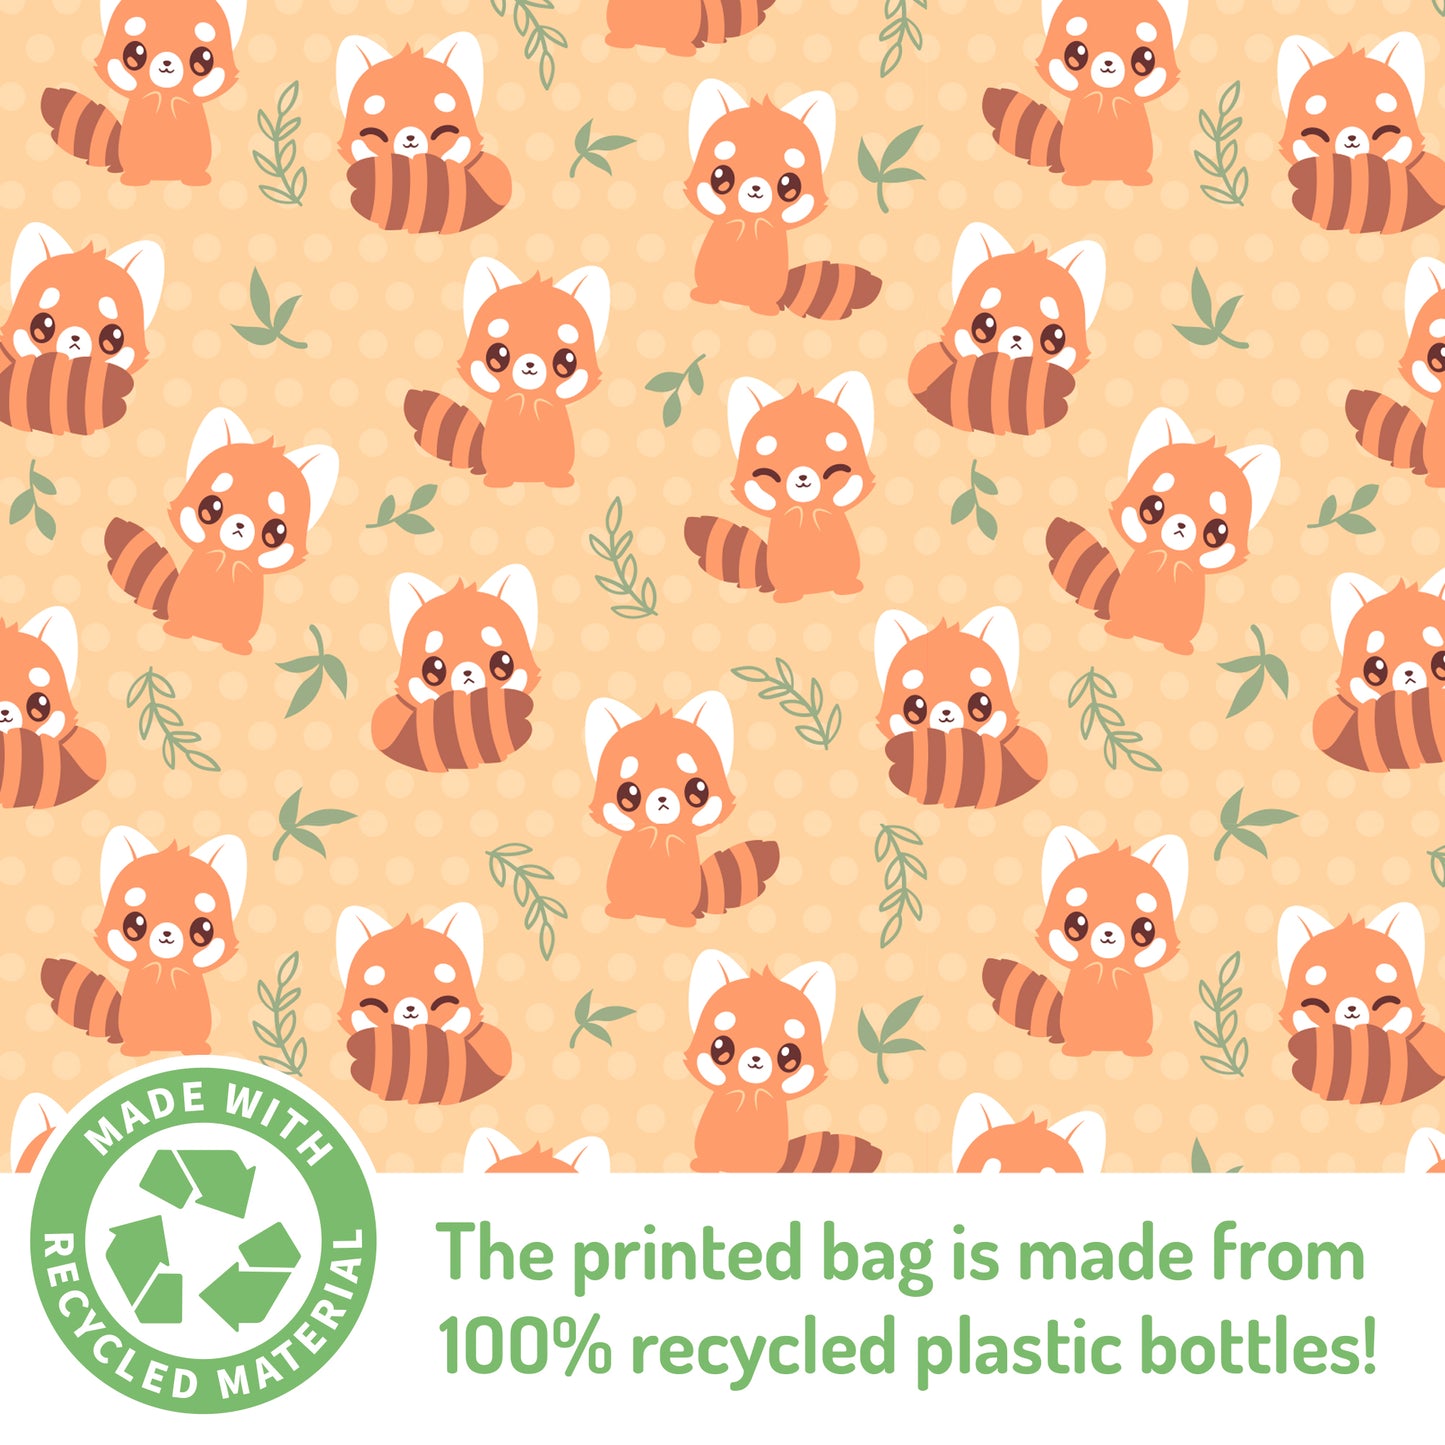 Patterned tote bag featuring illustrations of red pandas with a label stating the item is made from 100% recycled plastic bottles.
Product: Plushiverse Bamboo Snack Plushie Tote Bag
Brand: TeeTurtle